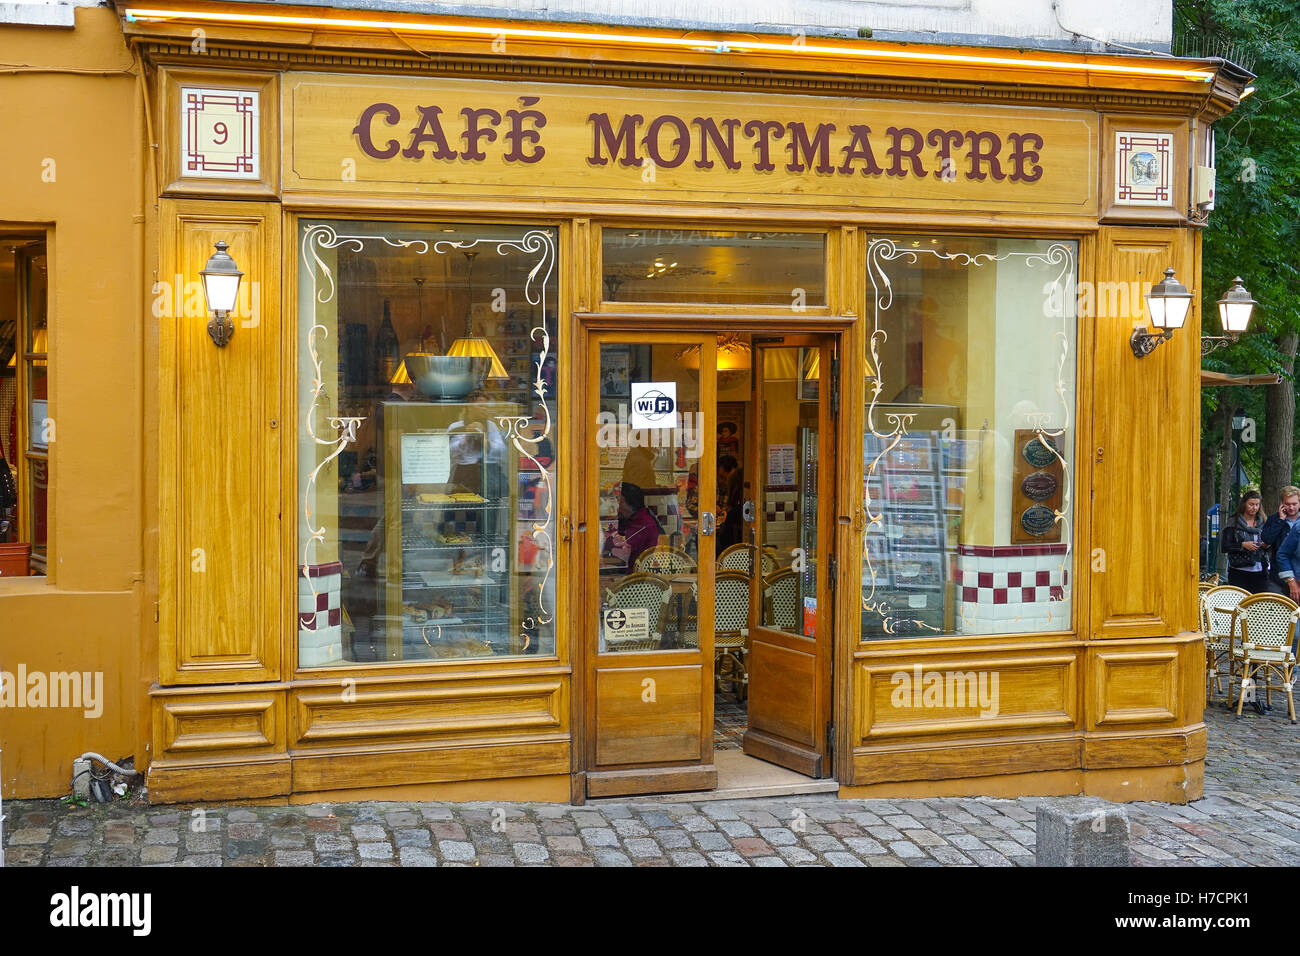 Typical Paris style street cafe - Cafe Montmartre Stock Photo - Alamy